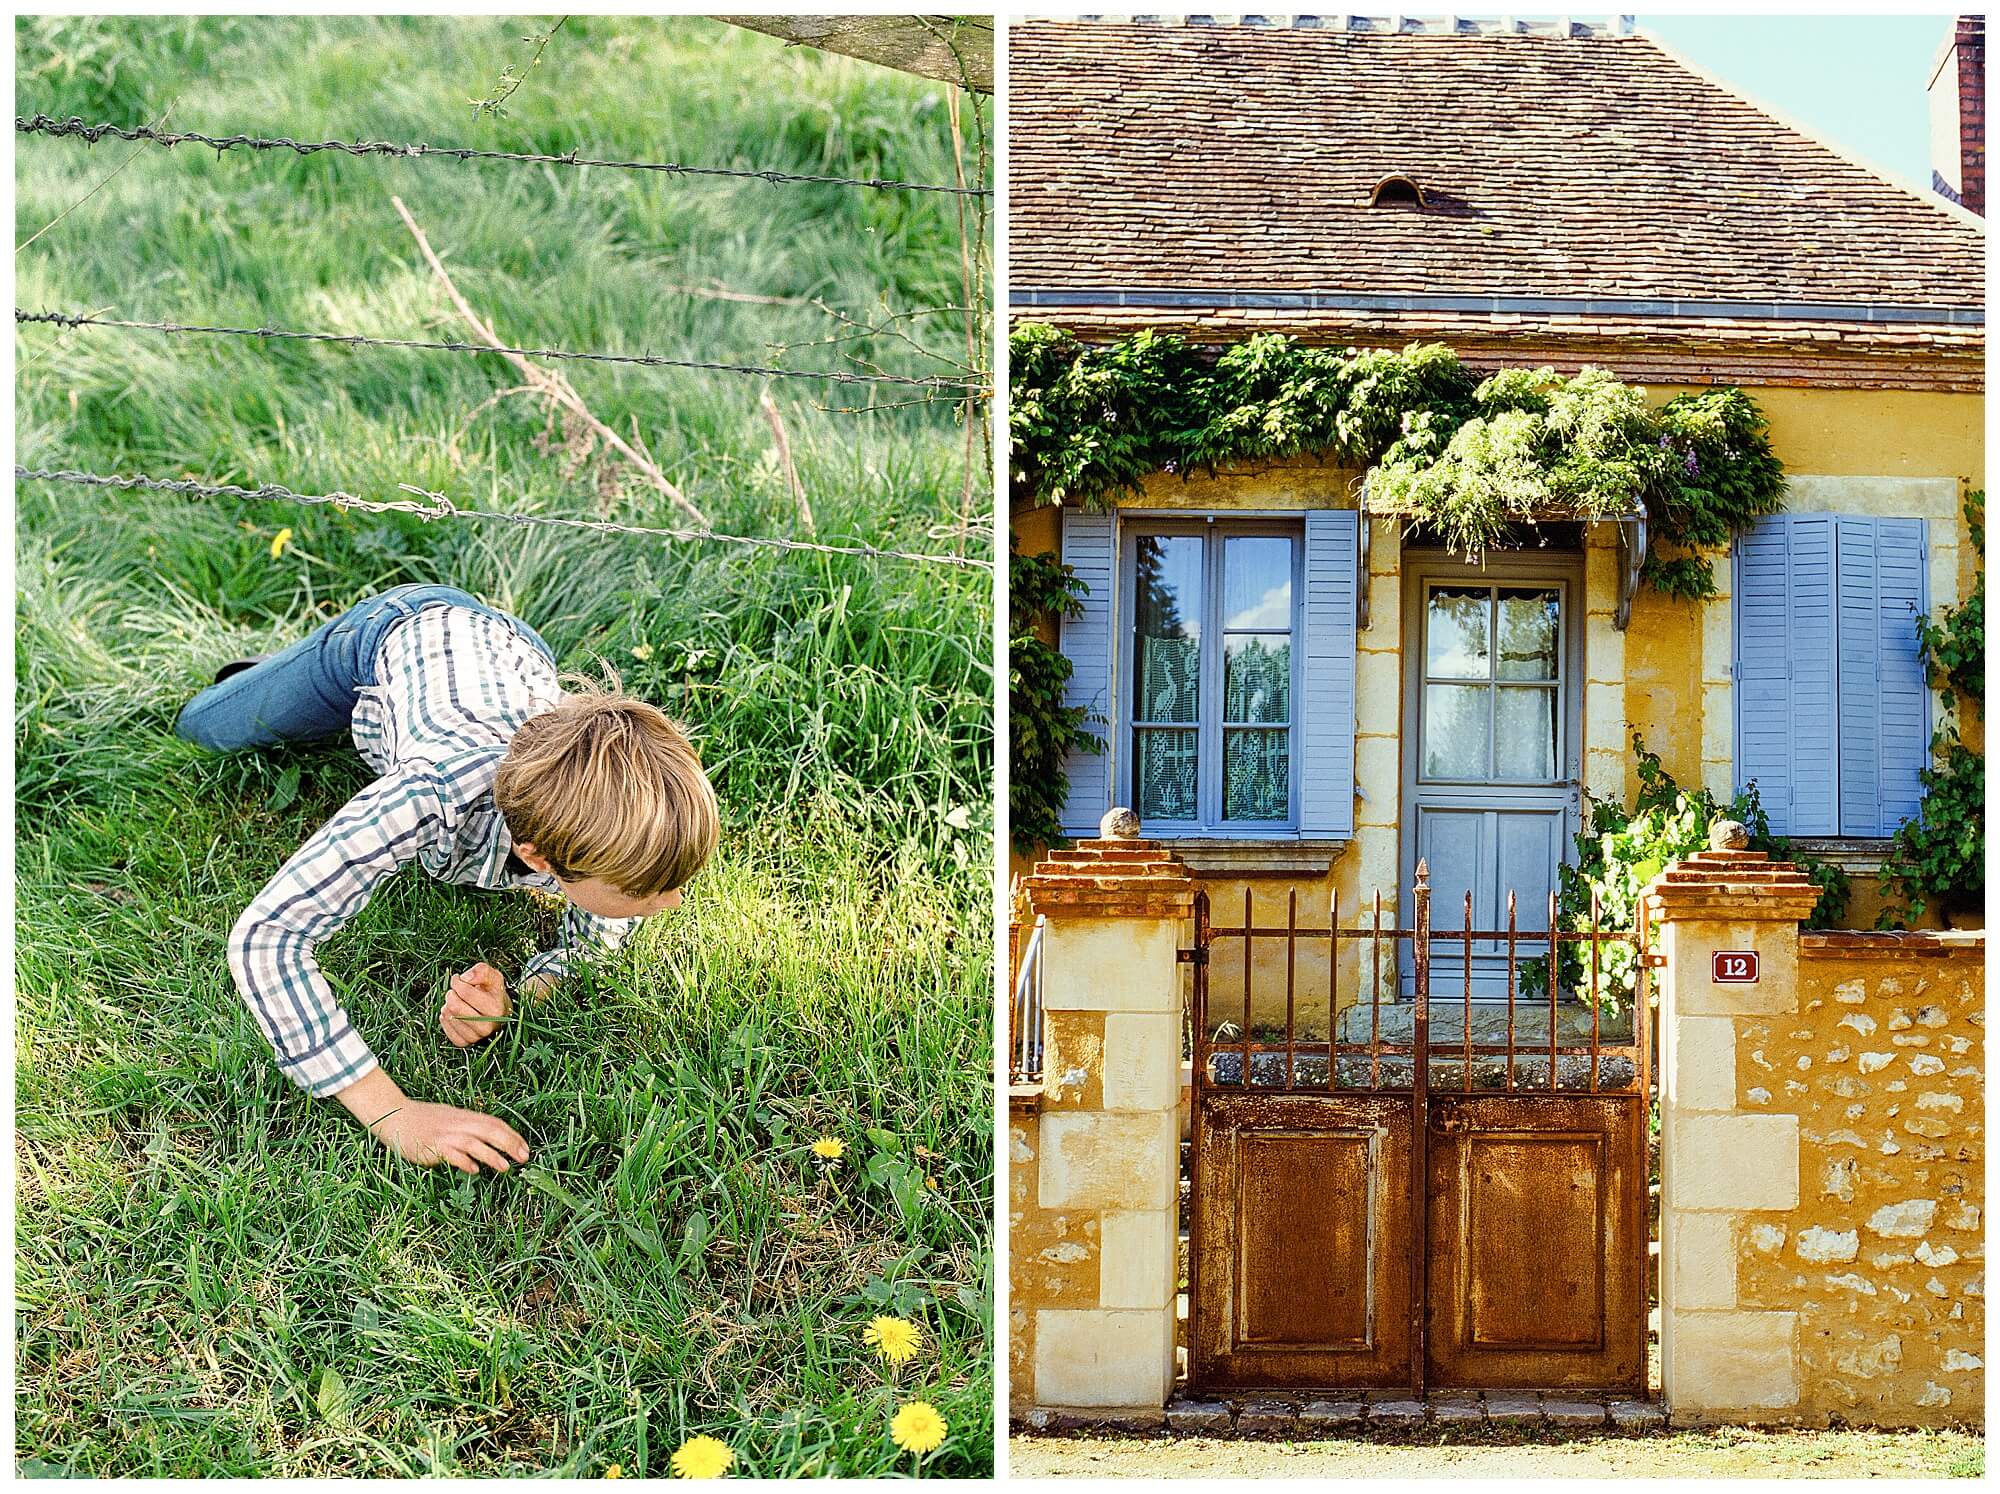 Left: A French boy crawls under a barbed wire fence in the French countryside during the COVID 19 quarantine. Right: A mustard yellow house with periwinkle blue shutters in the countryside.